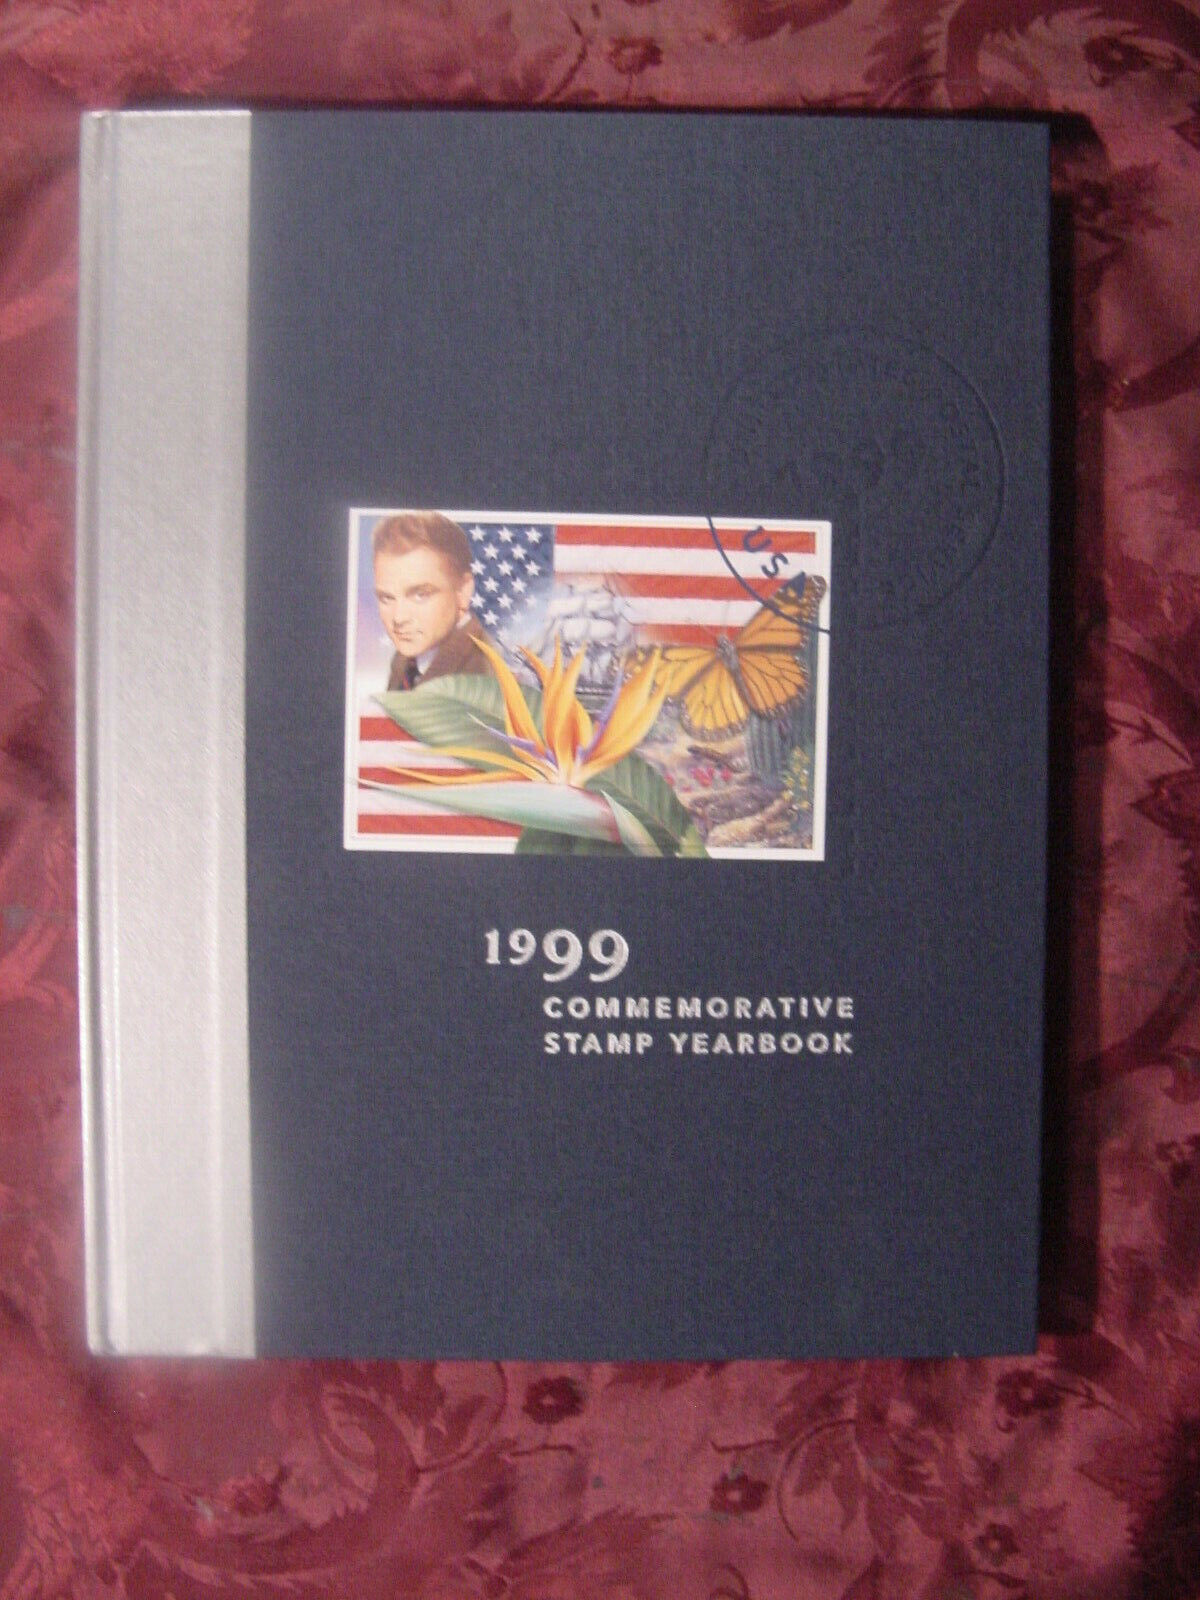 RARE 1999 Commemorative Stamp Yearbook from USPS